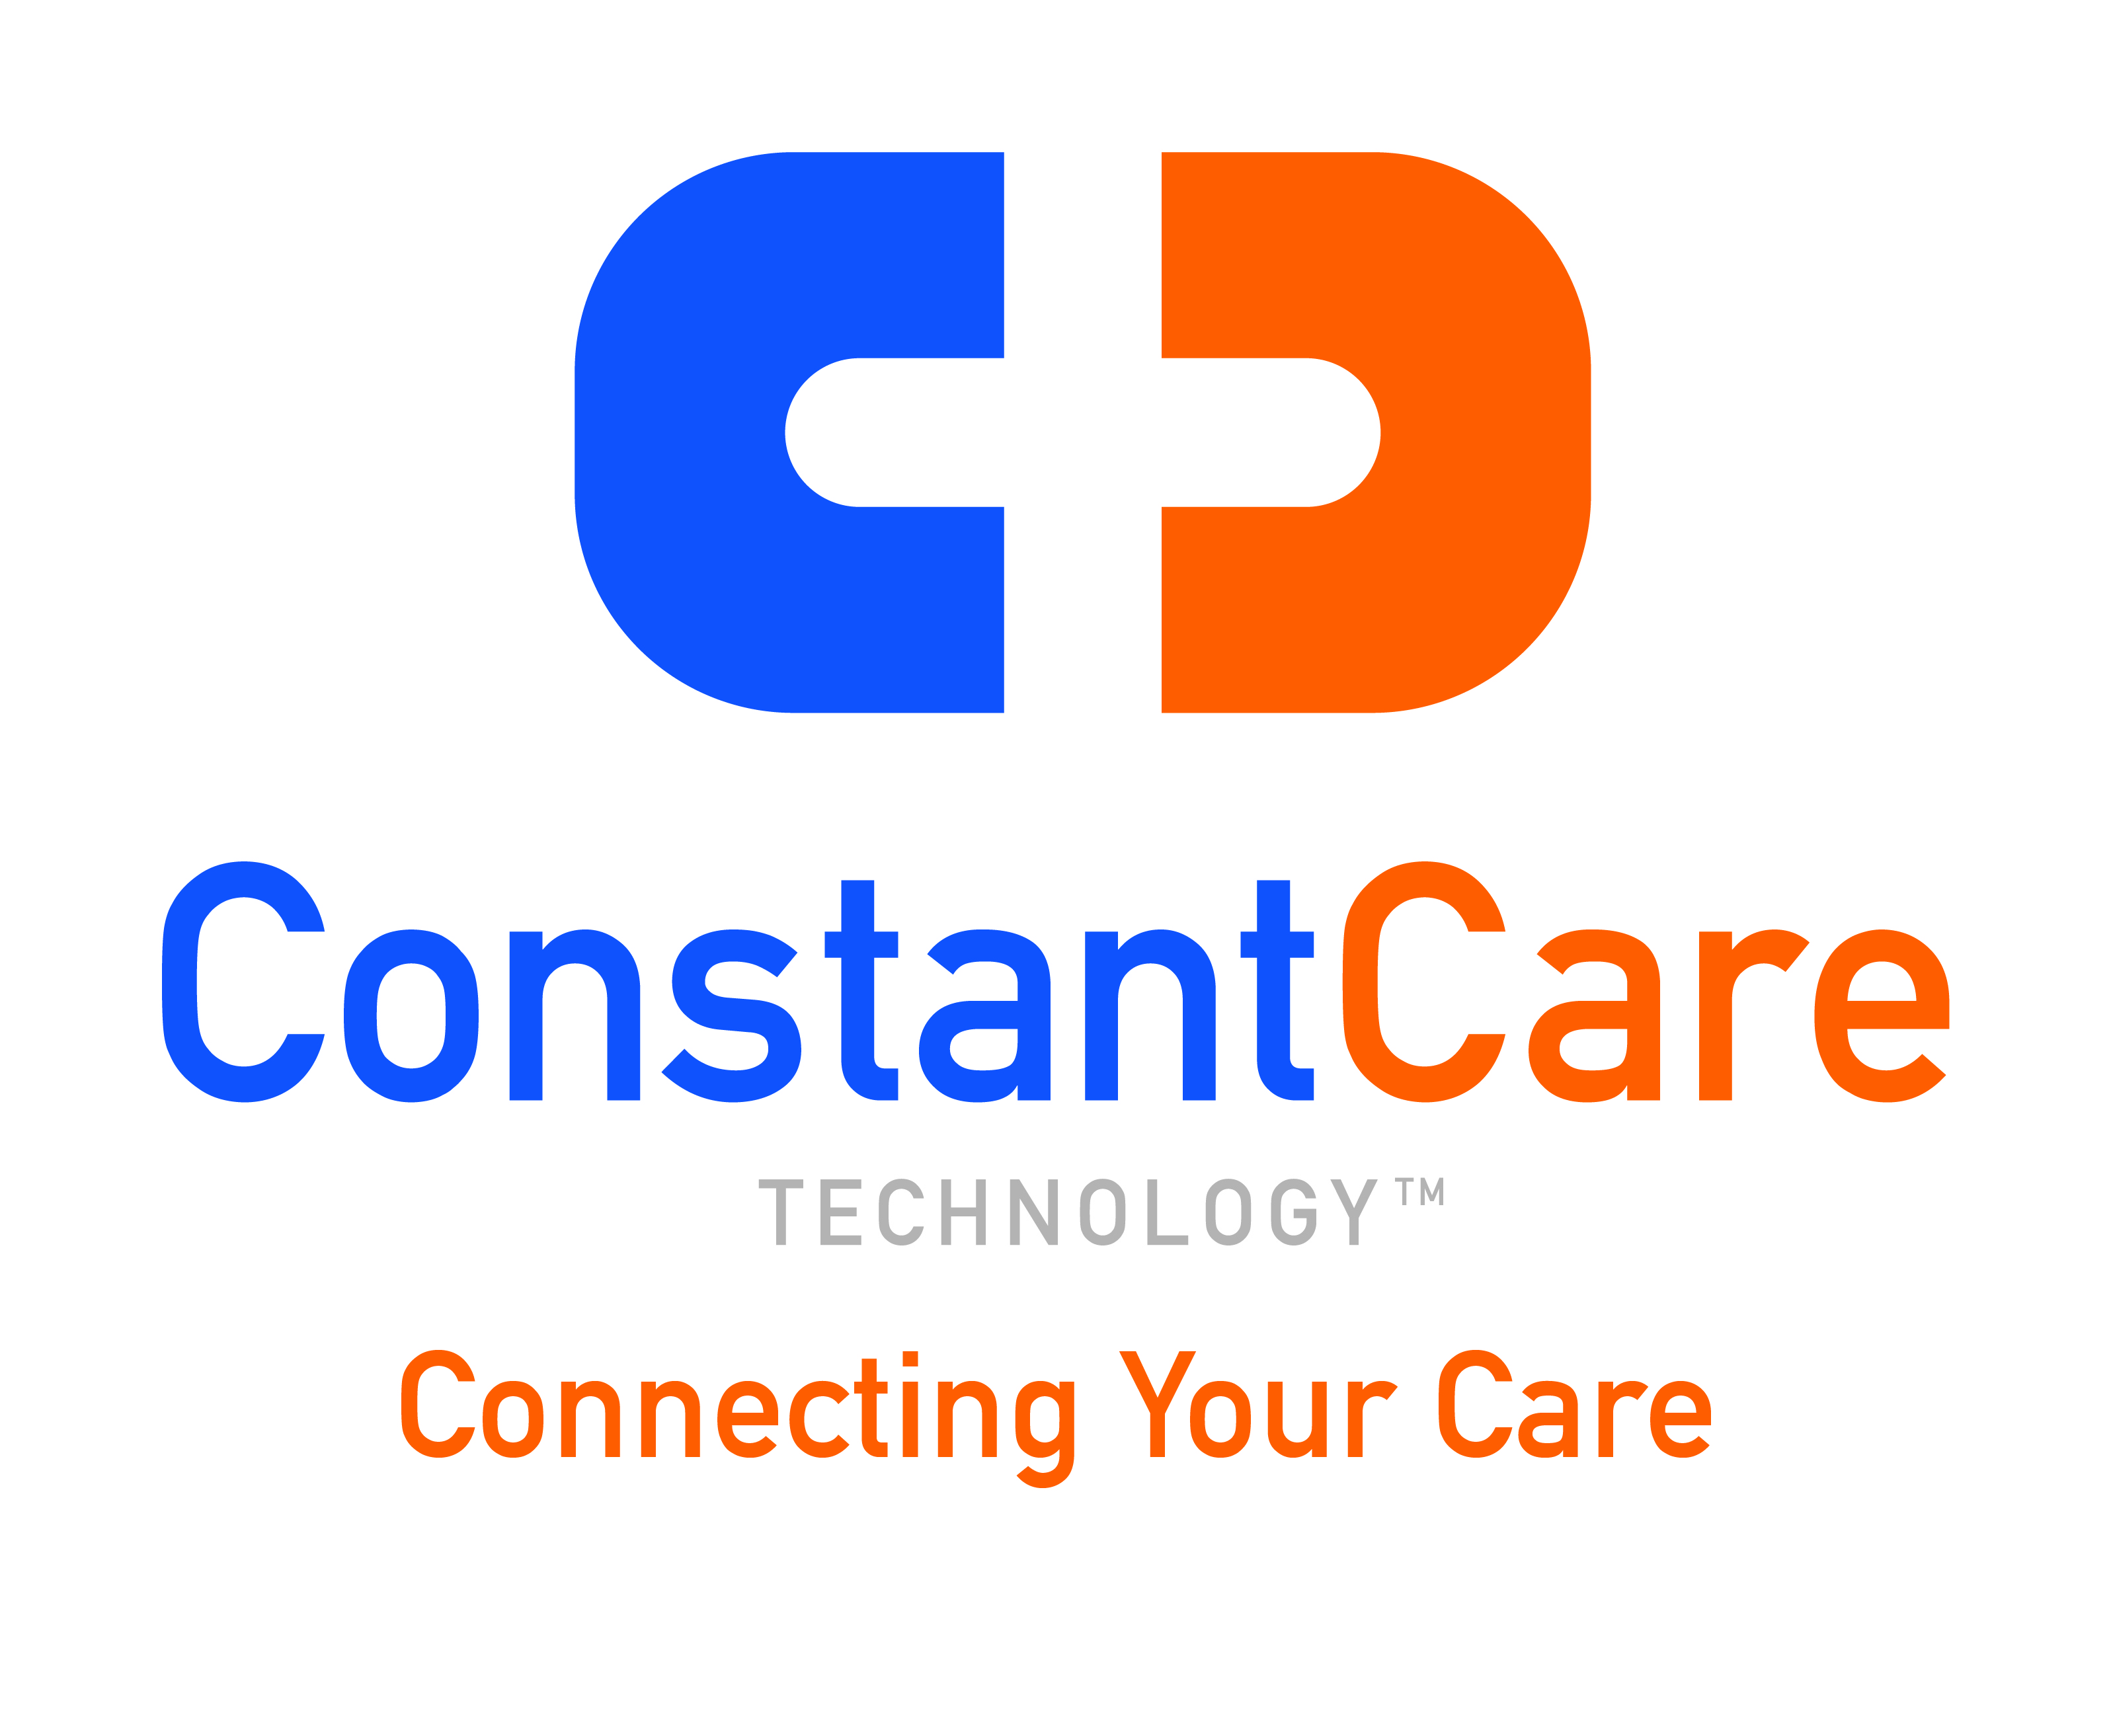 Constant Care Technology:  Connecting Your Care